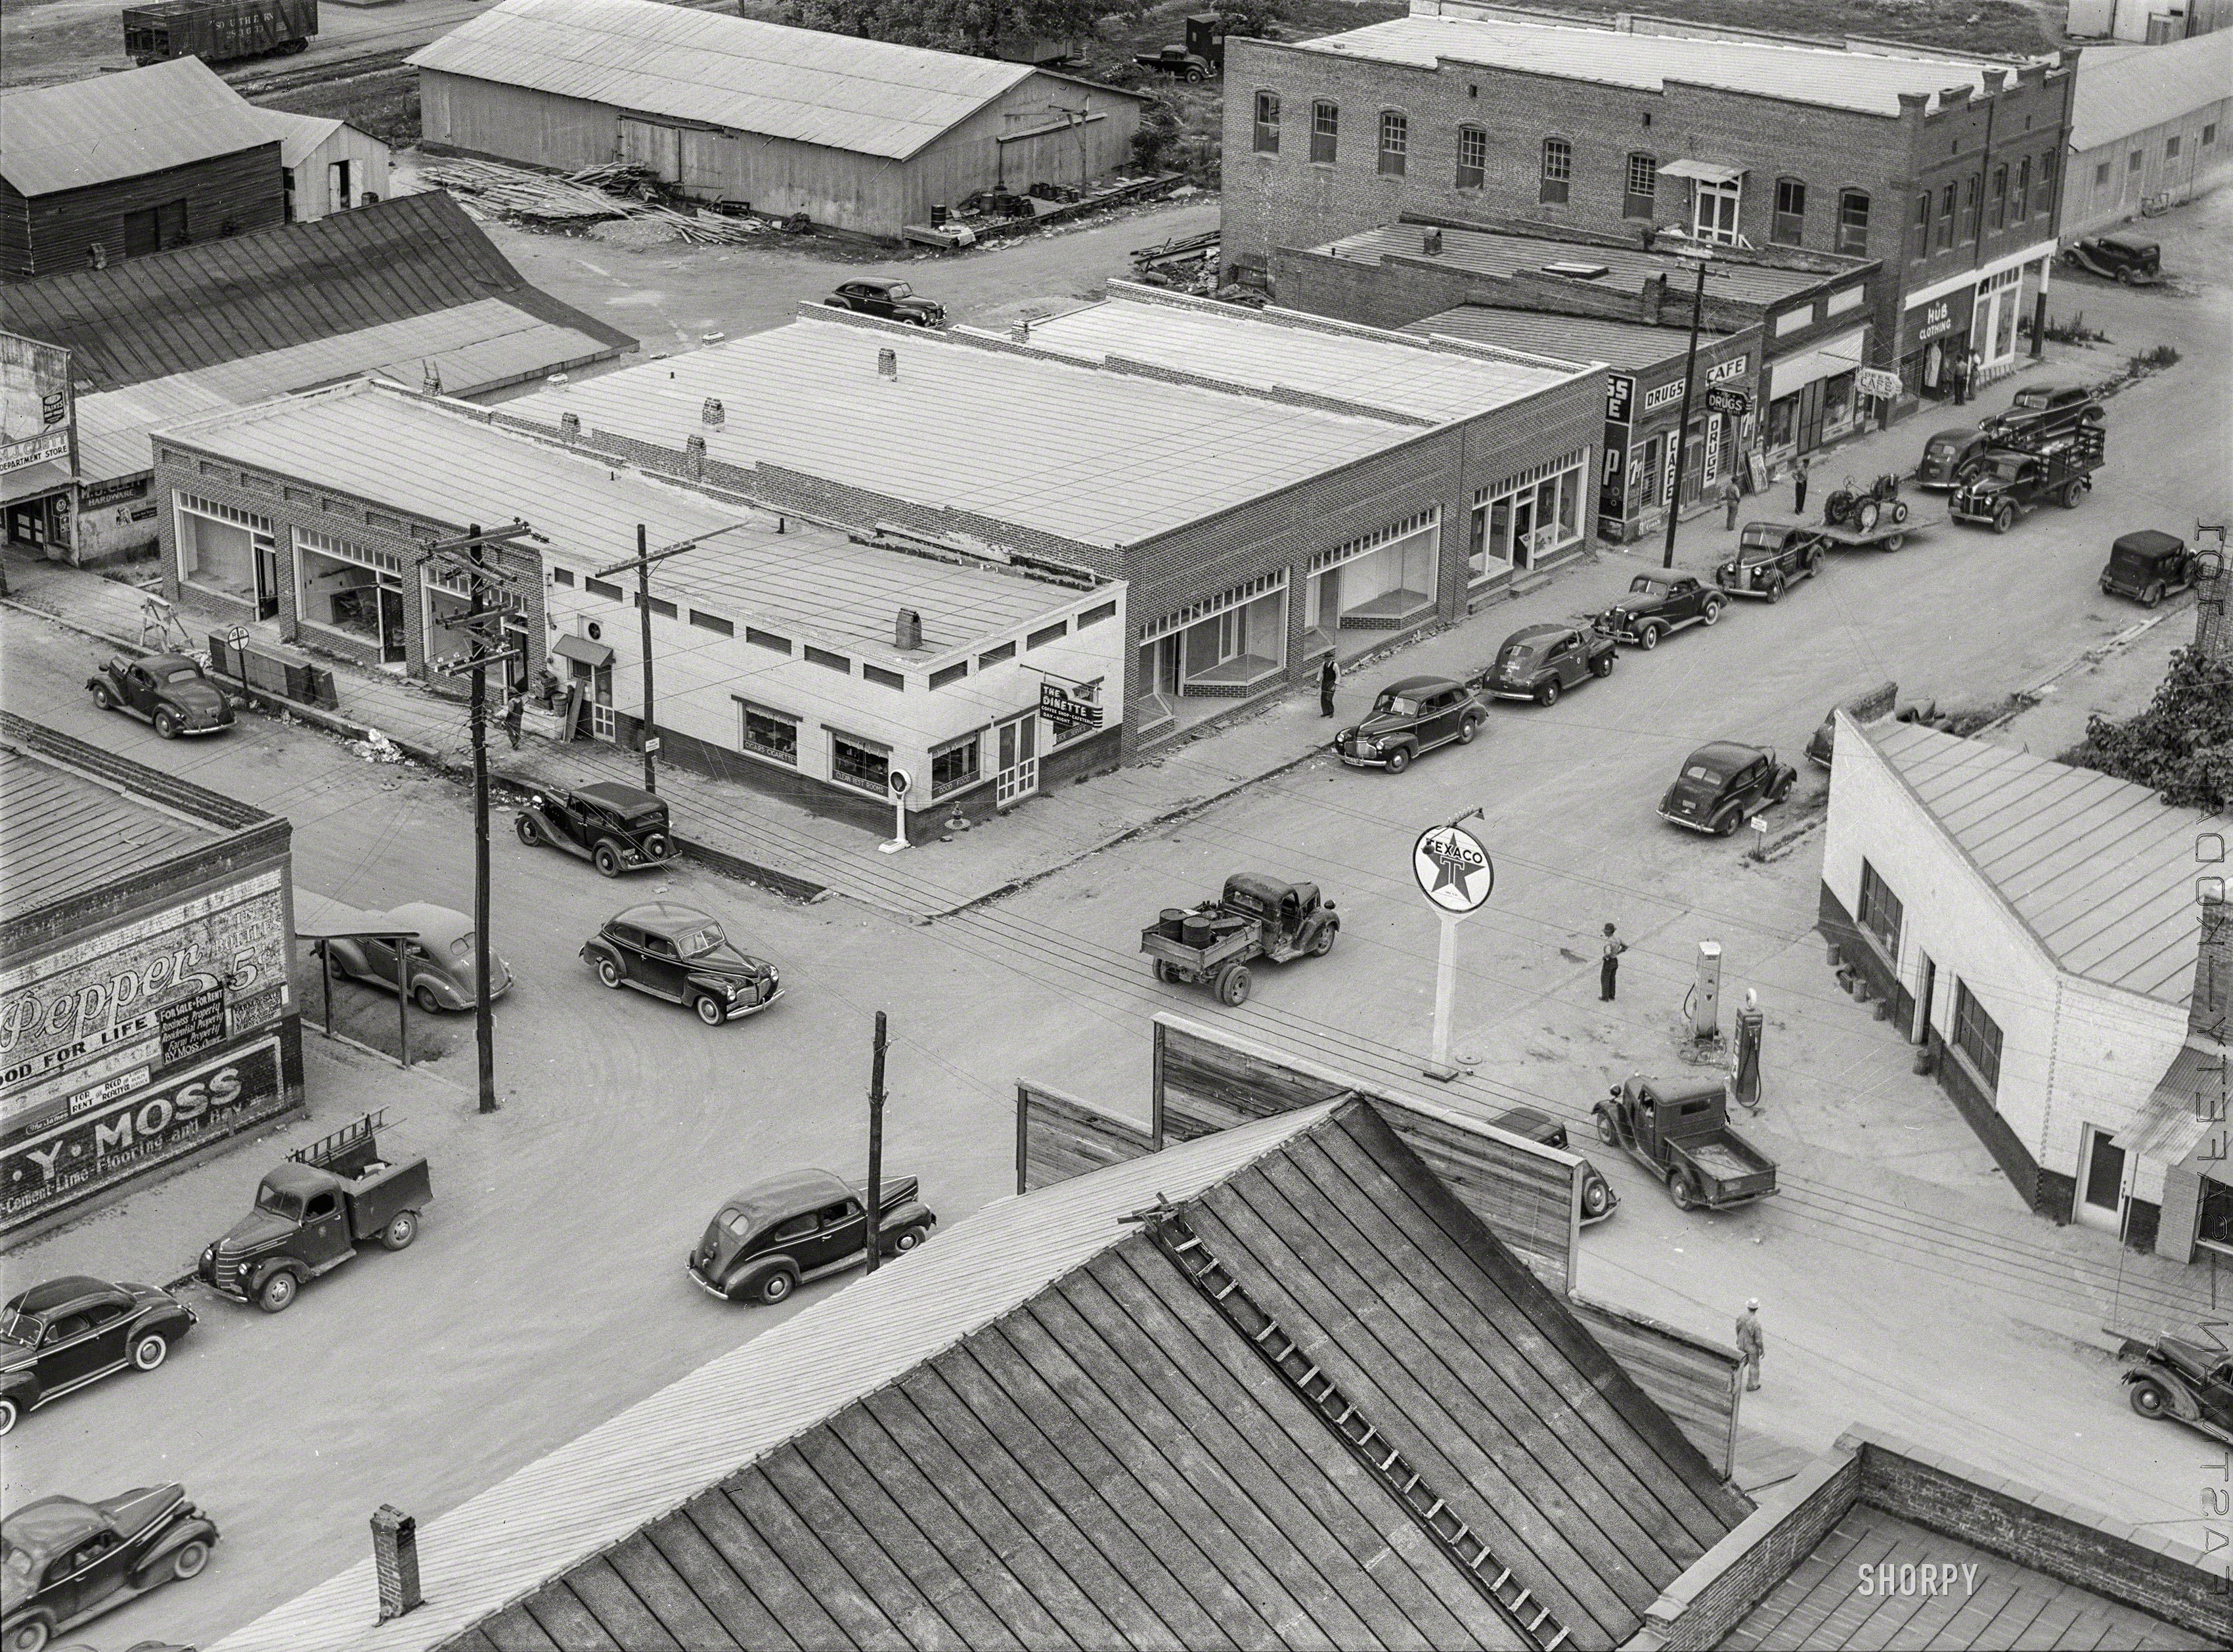 May 1941. "Intersection of the two main streets of Childersburg, Alabama." Acetate negative by Jack Delano for the Farm Security Administration. View full size.